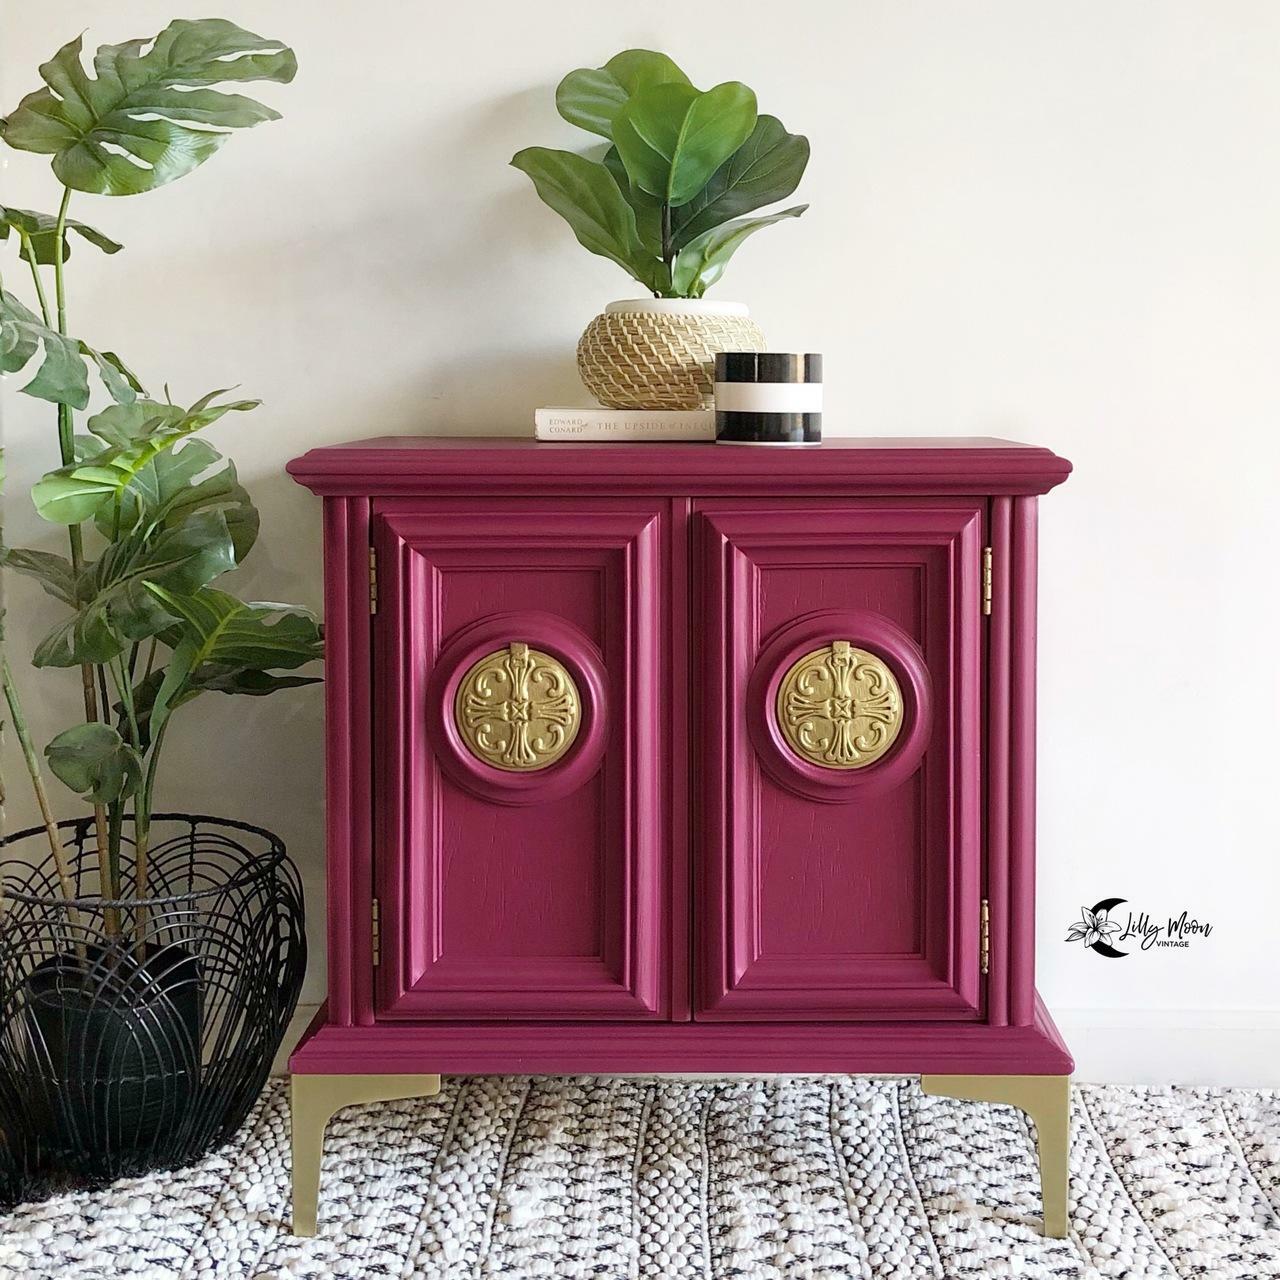 Plum Crazy Dixie Belle Chalk Mineral Paint - Same Day Shipping - No VOC - Chalk Paint for Furniture and Cabinets - Water Based Paint - belleandbeau850